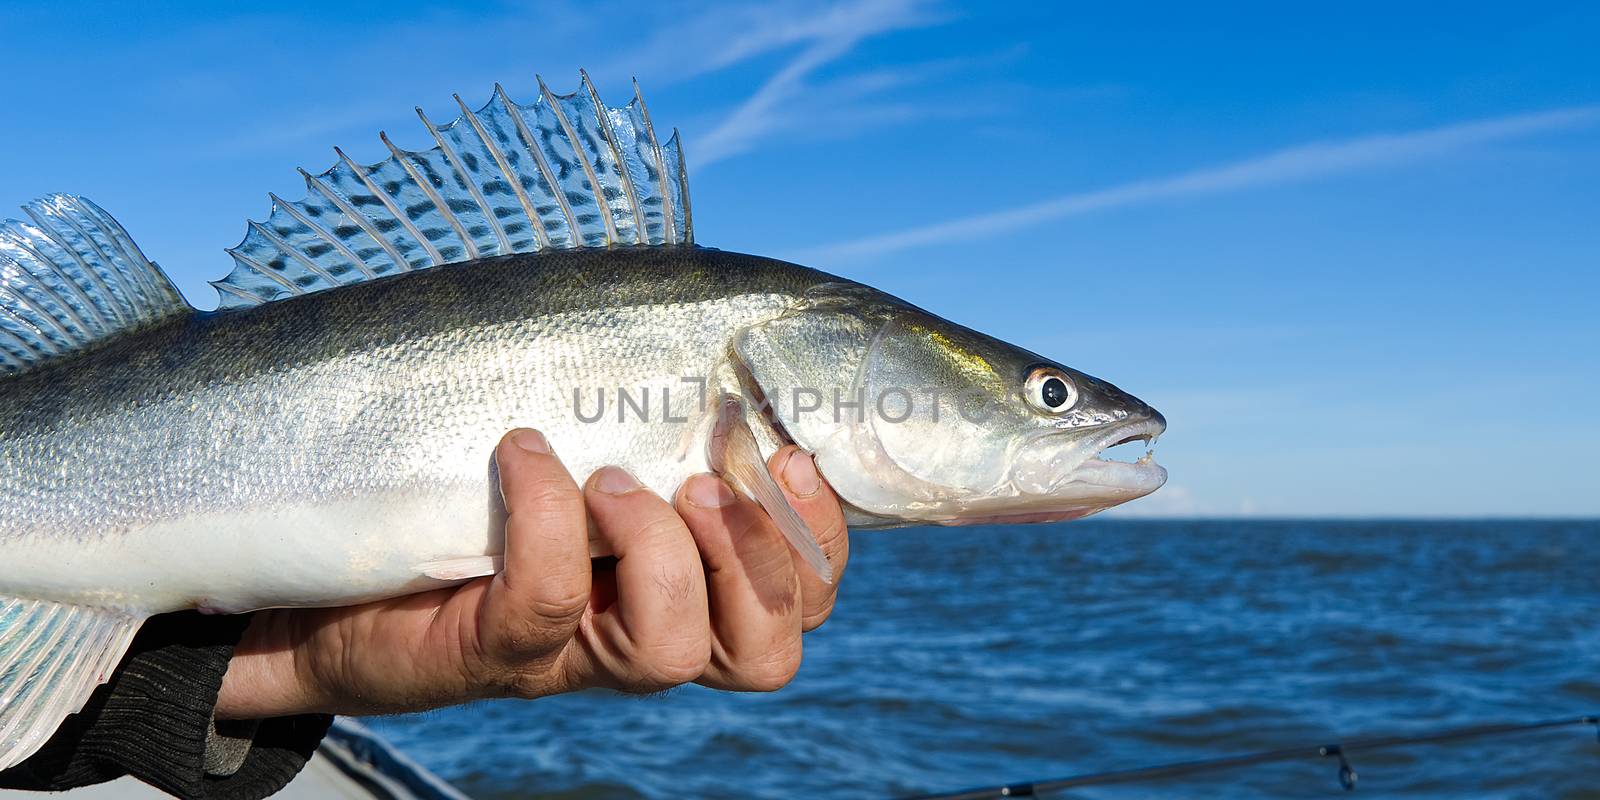 Fisherman holds a caught zander or pike perch in hands against t by PhotoTime